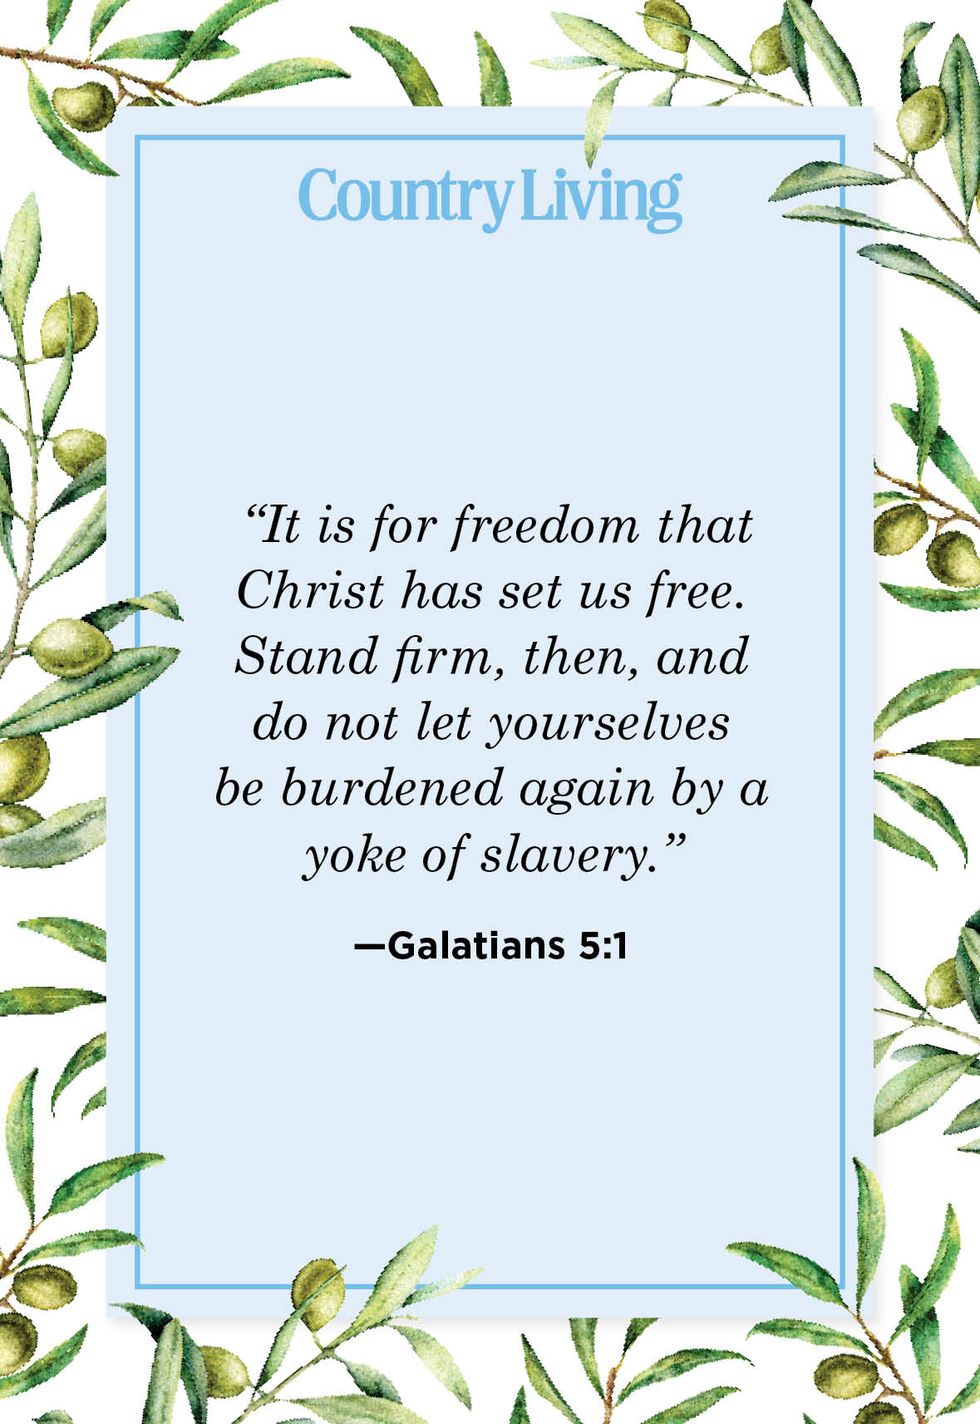 it is for freedom that christ has set us free stand firm, then, and do not let yourselves be burdened again by a yoke of slavery